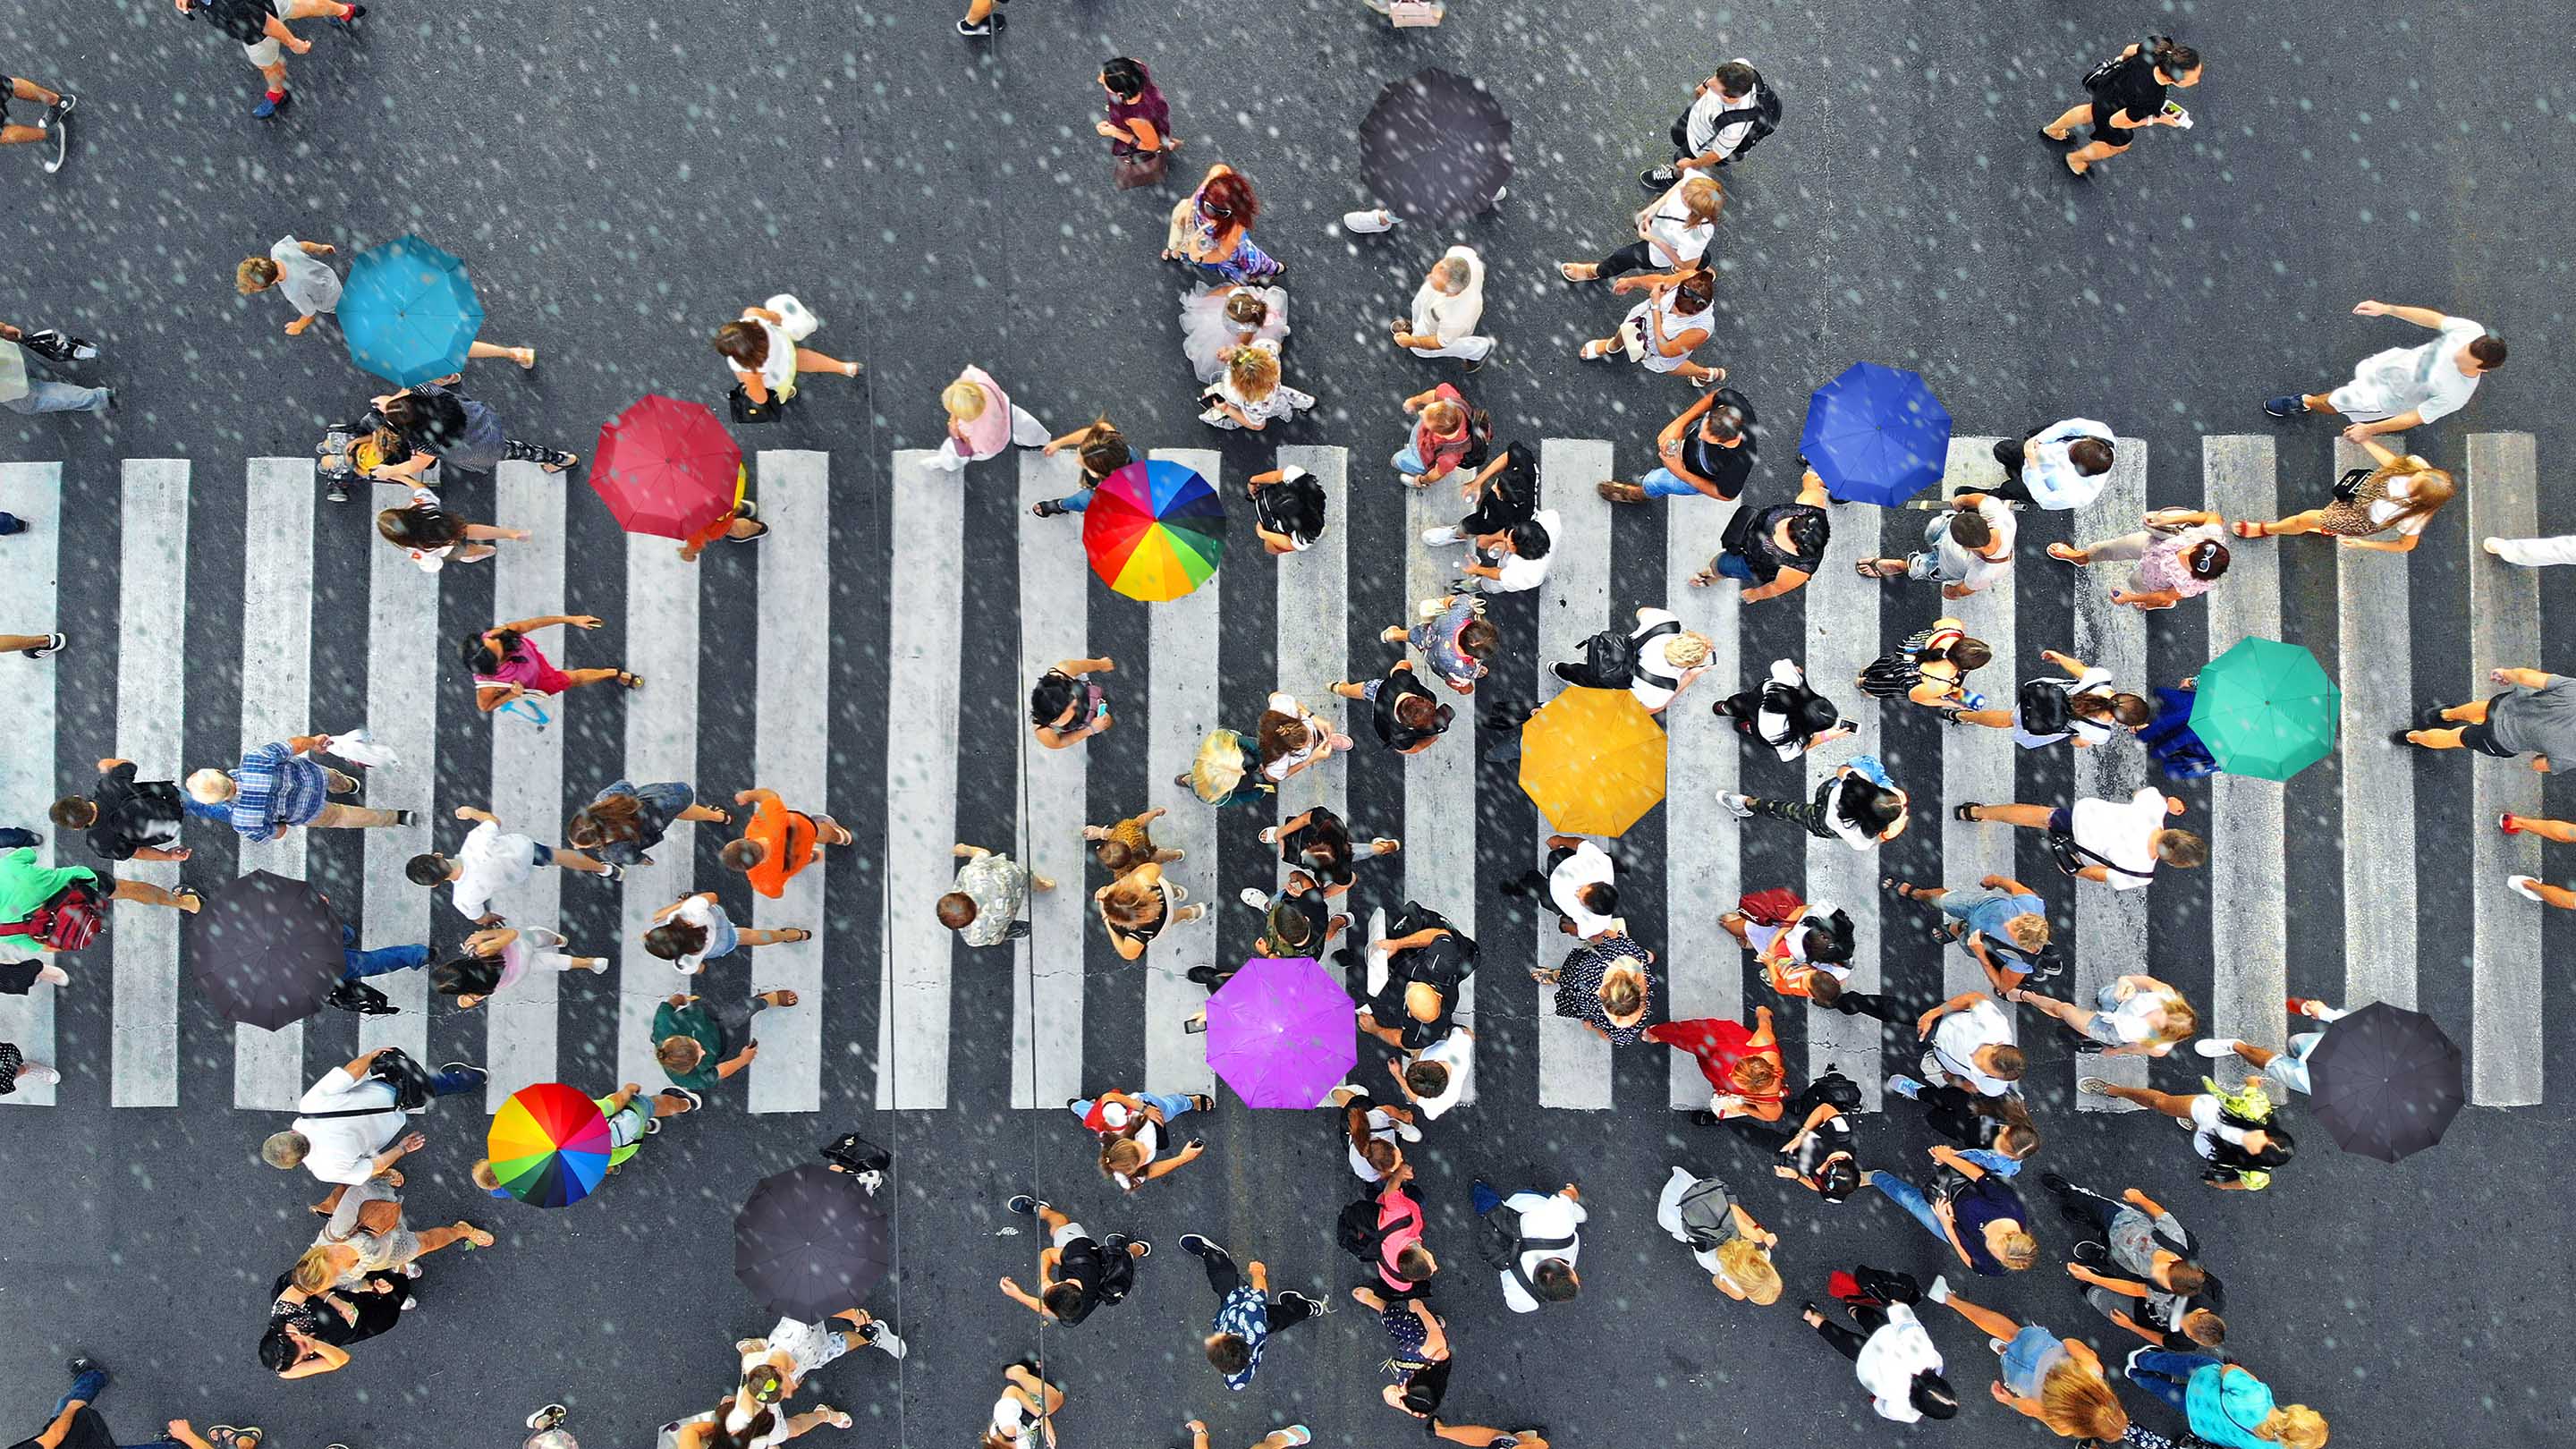 People on a zebra crossing seen from above, some are holding colourful umbrellas